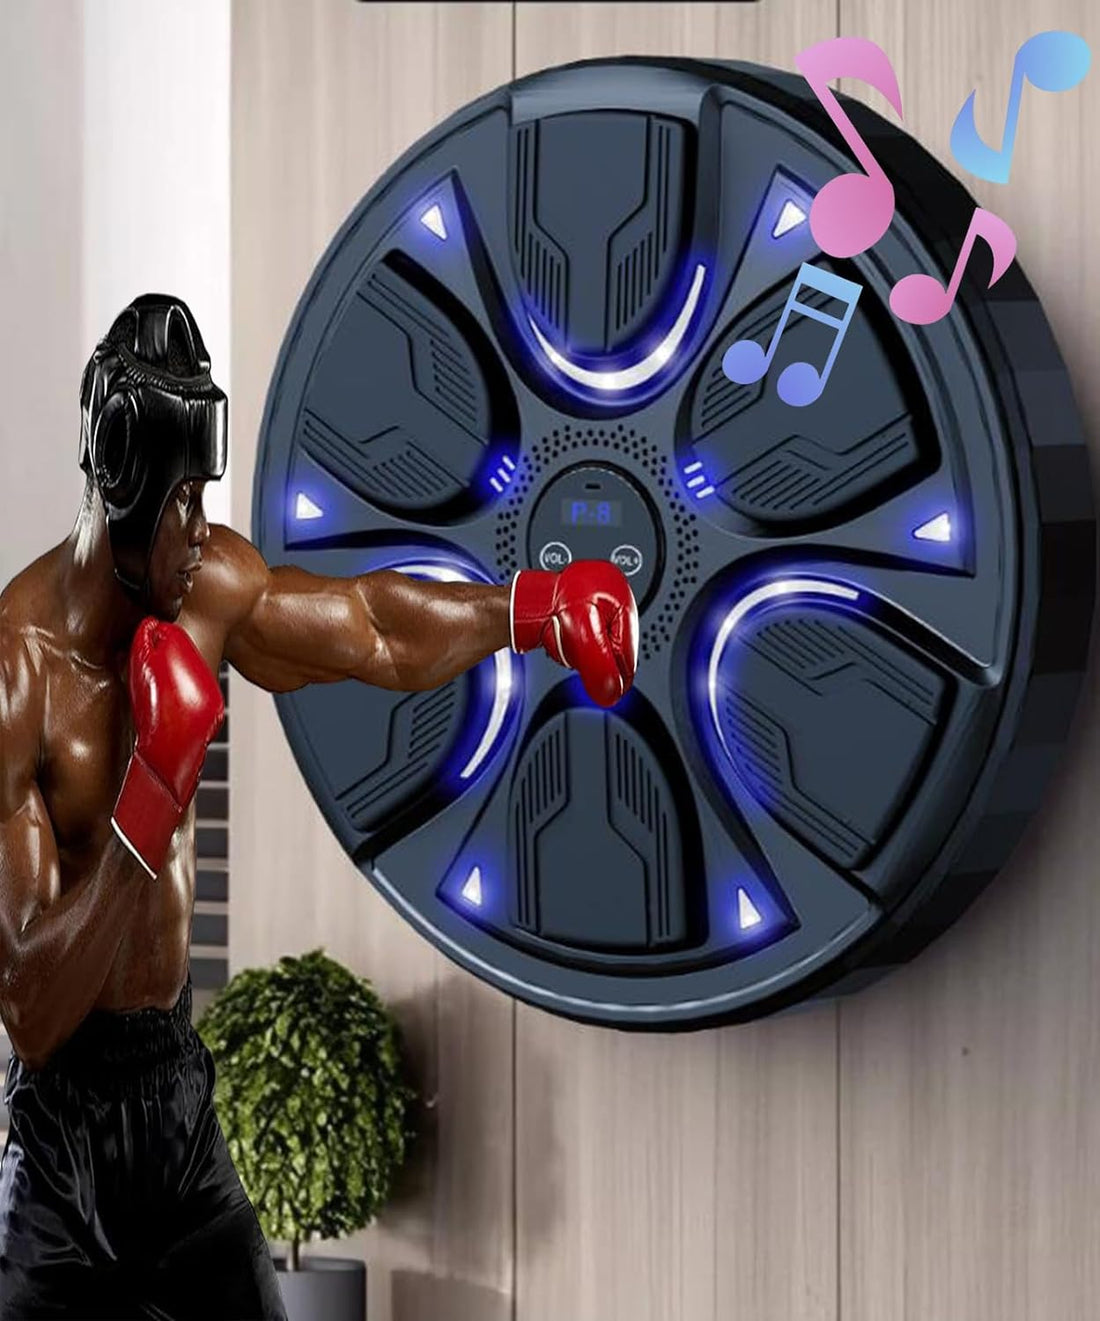 BAFLO Music Boxing Machine with Boxing Gloves, Smart Boxing Machine Wall Mounted Music Mounted Focus Agility Training Boxing Wall Target Punching Pad for Adult Youth Kid,A